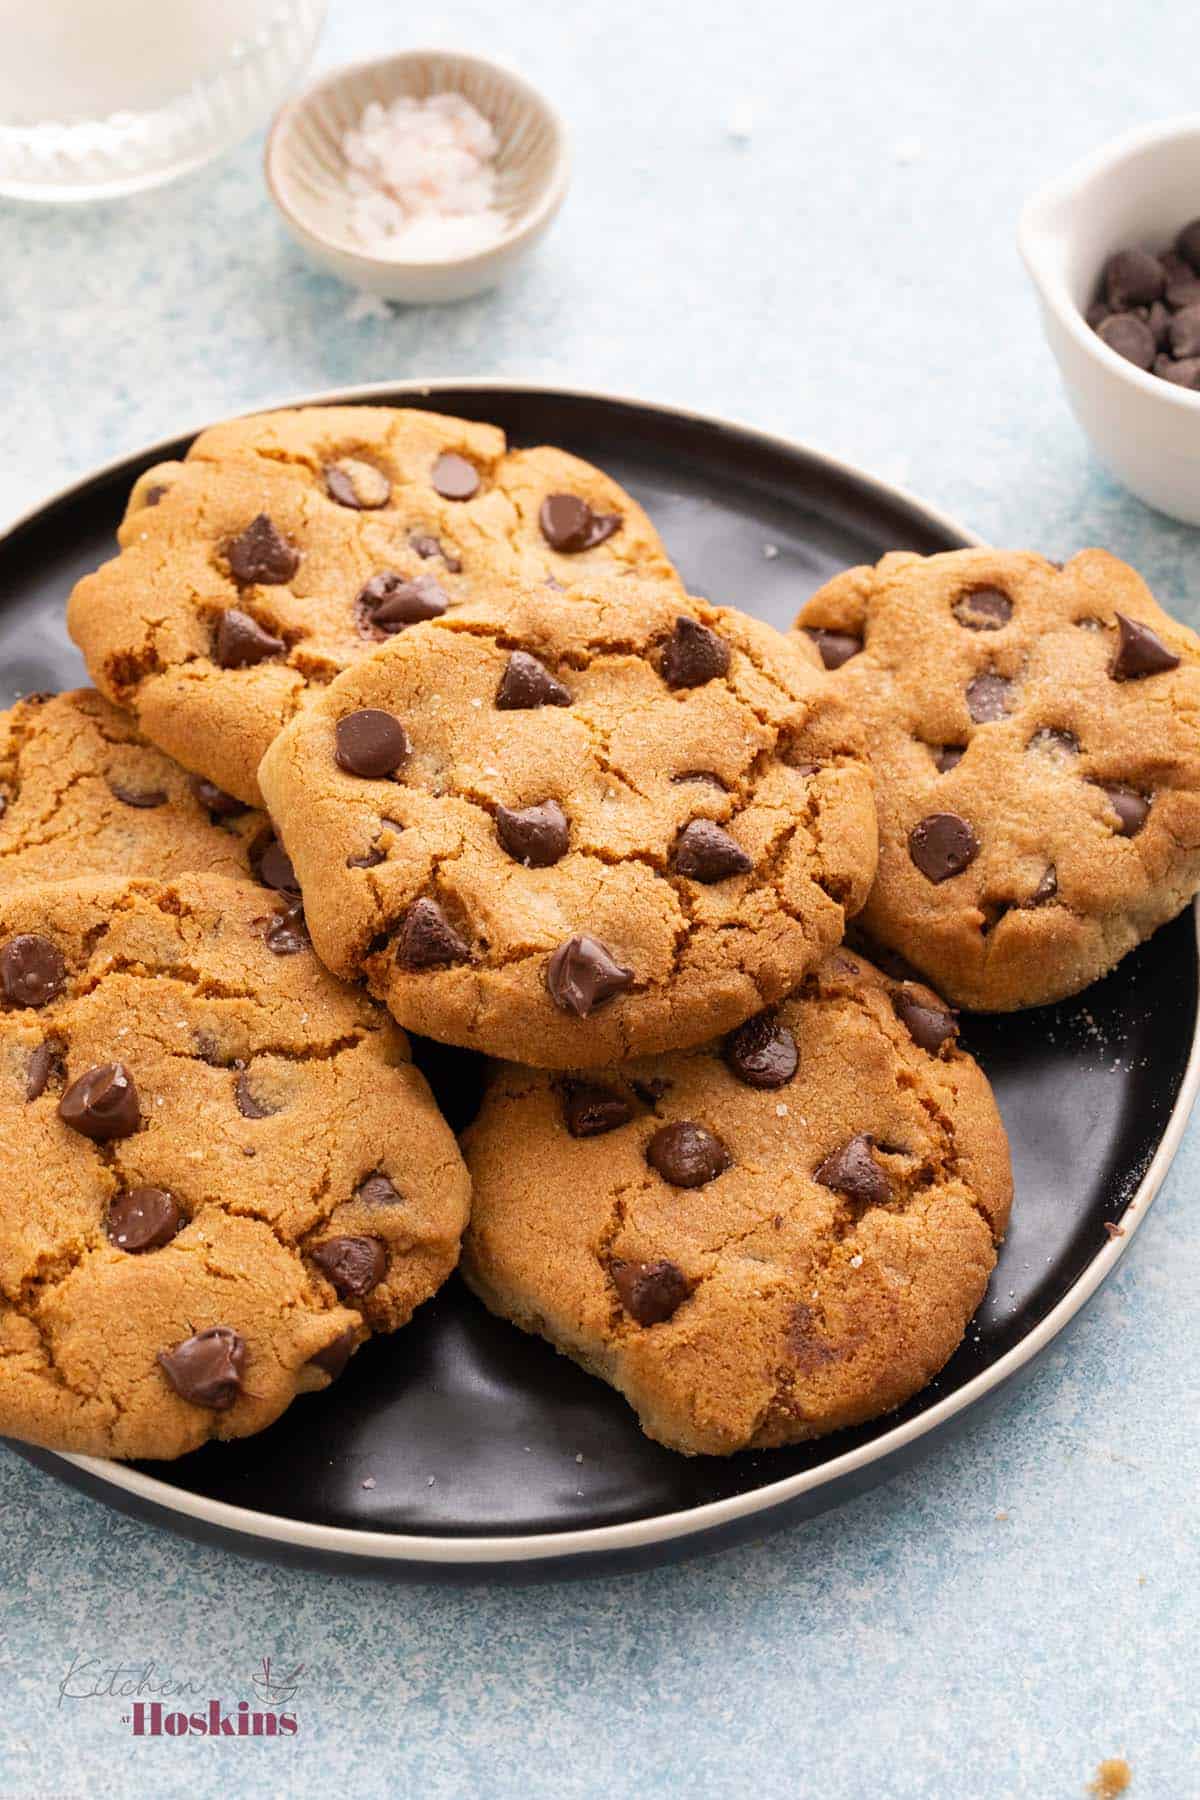 6 chocolate chip cookies on a round black plate.